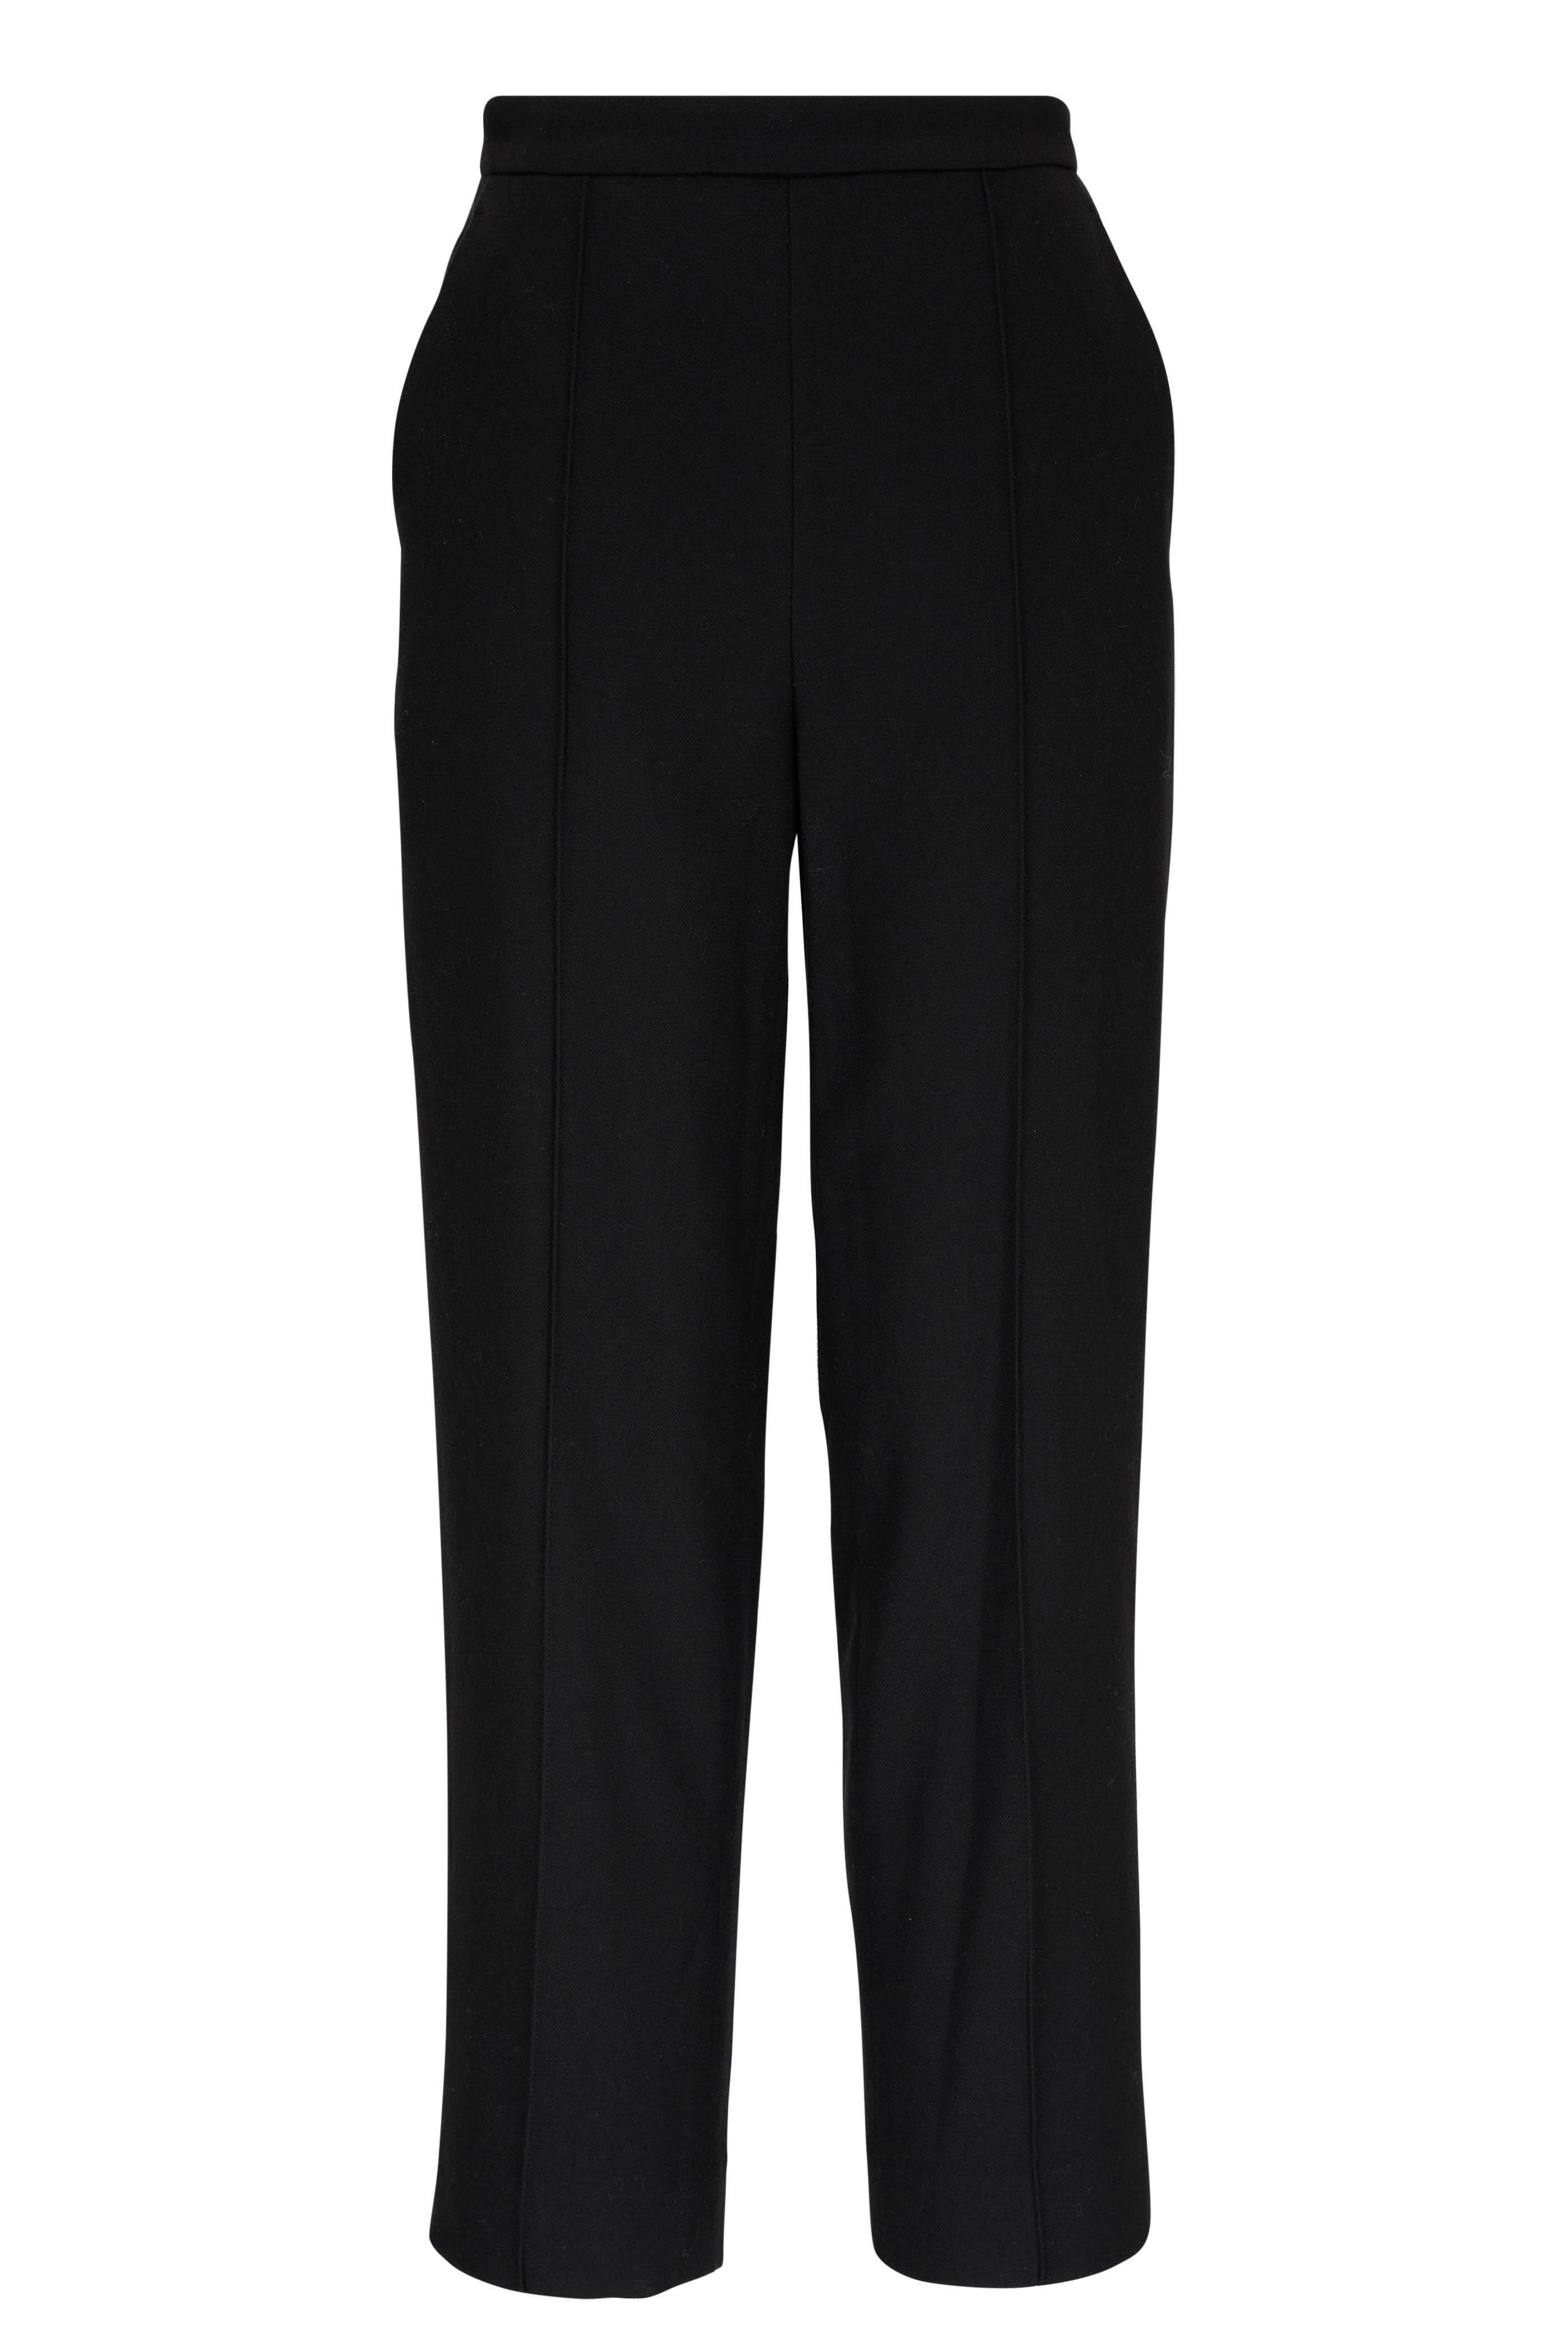 Vince - Brushed Wool Black Pull-On Pant | Mitchell Stores